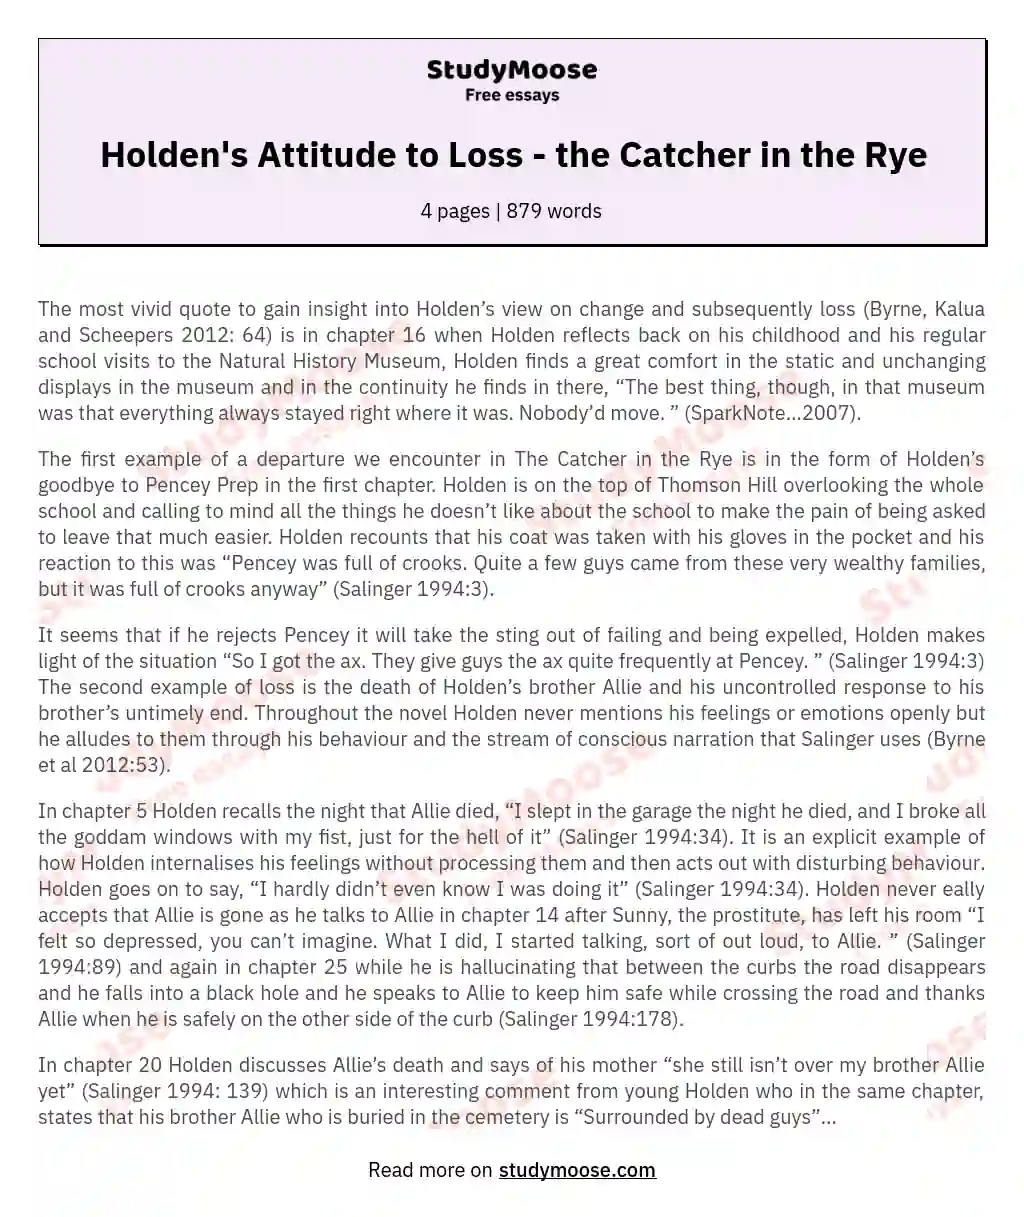 Holden's Attitude to Loss - the Catcher in the Rye essay